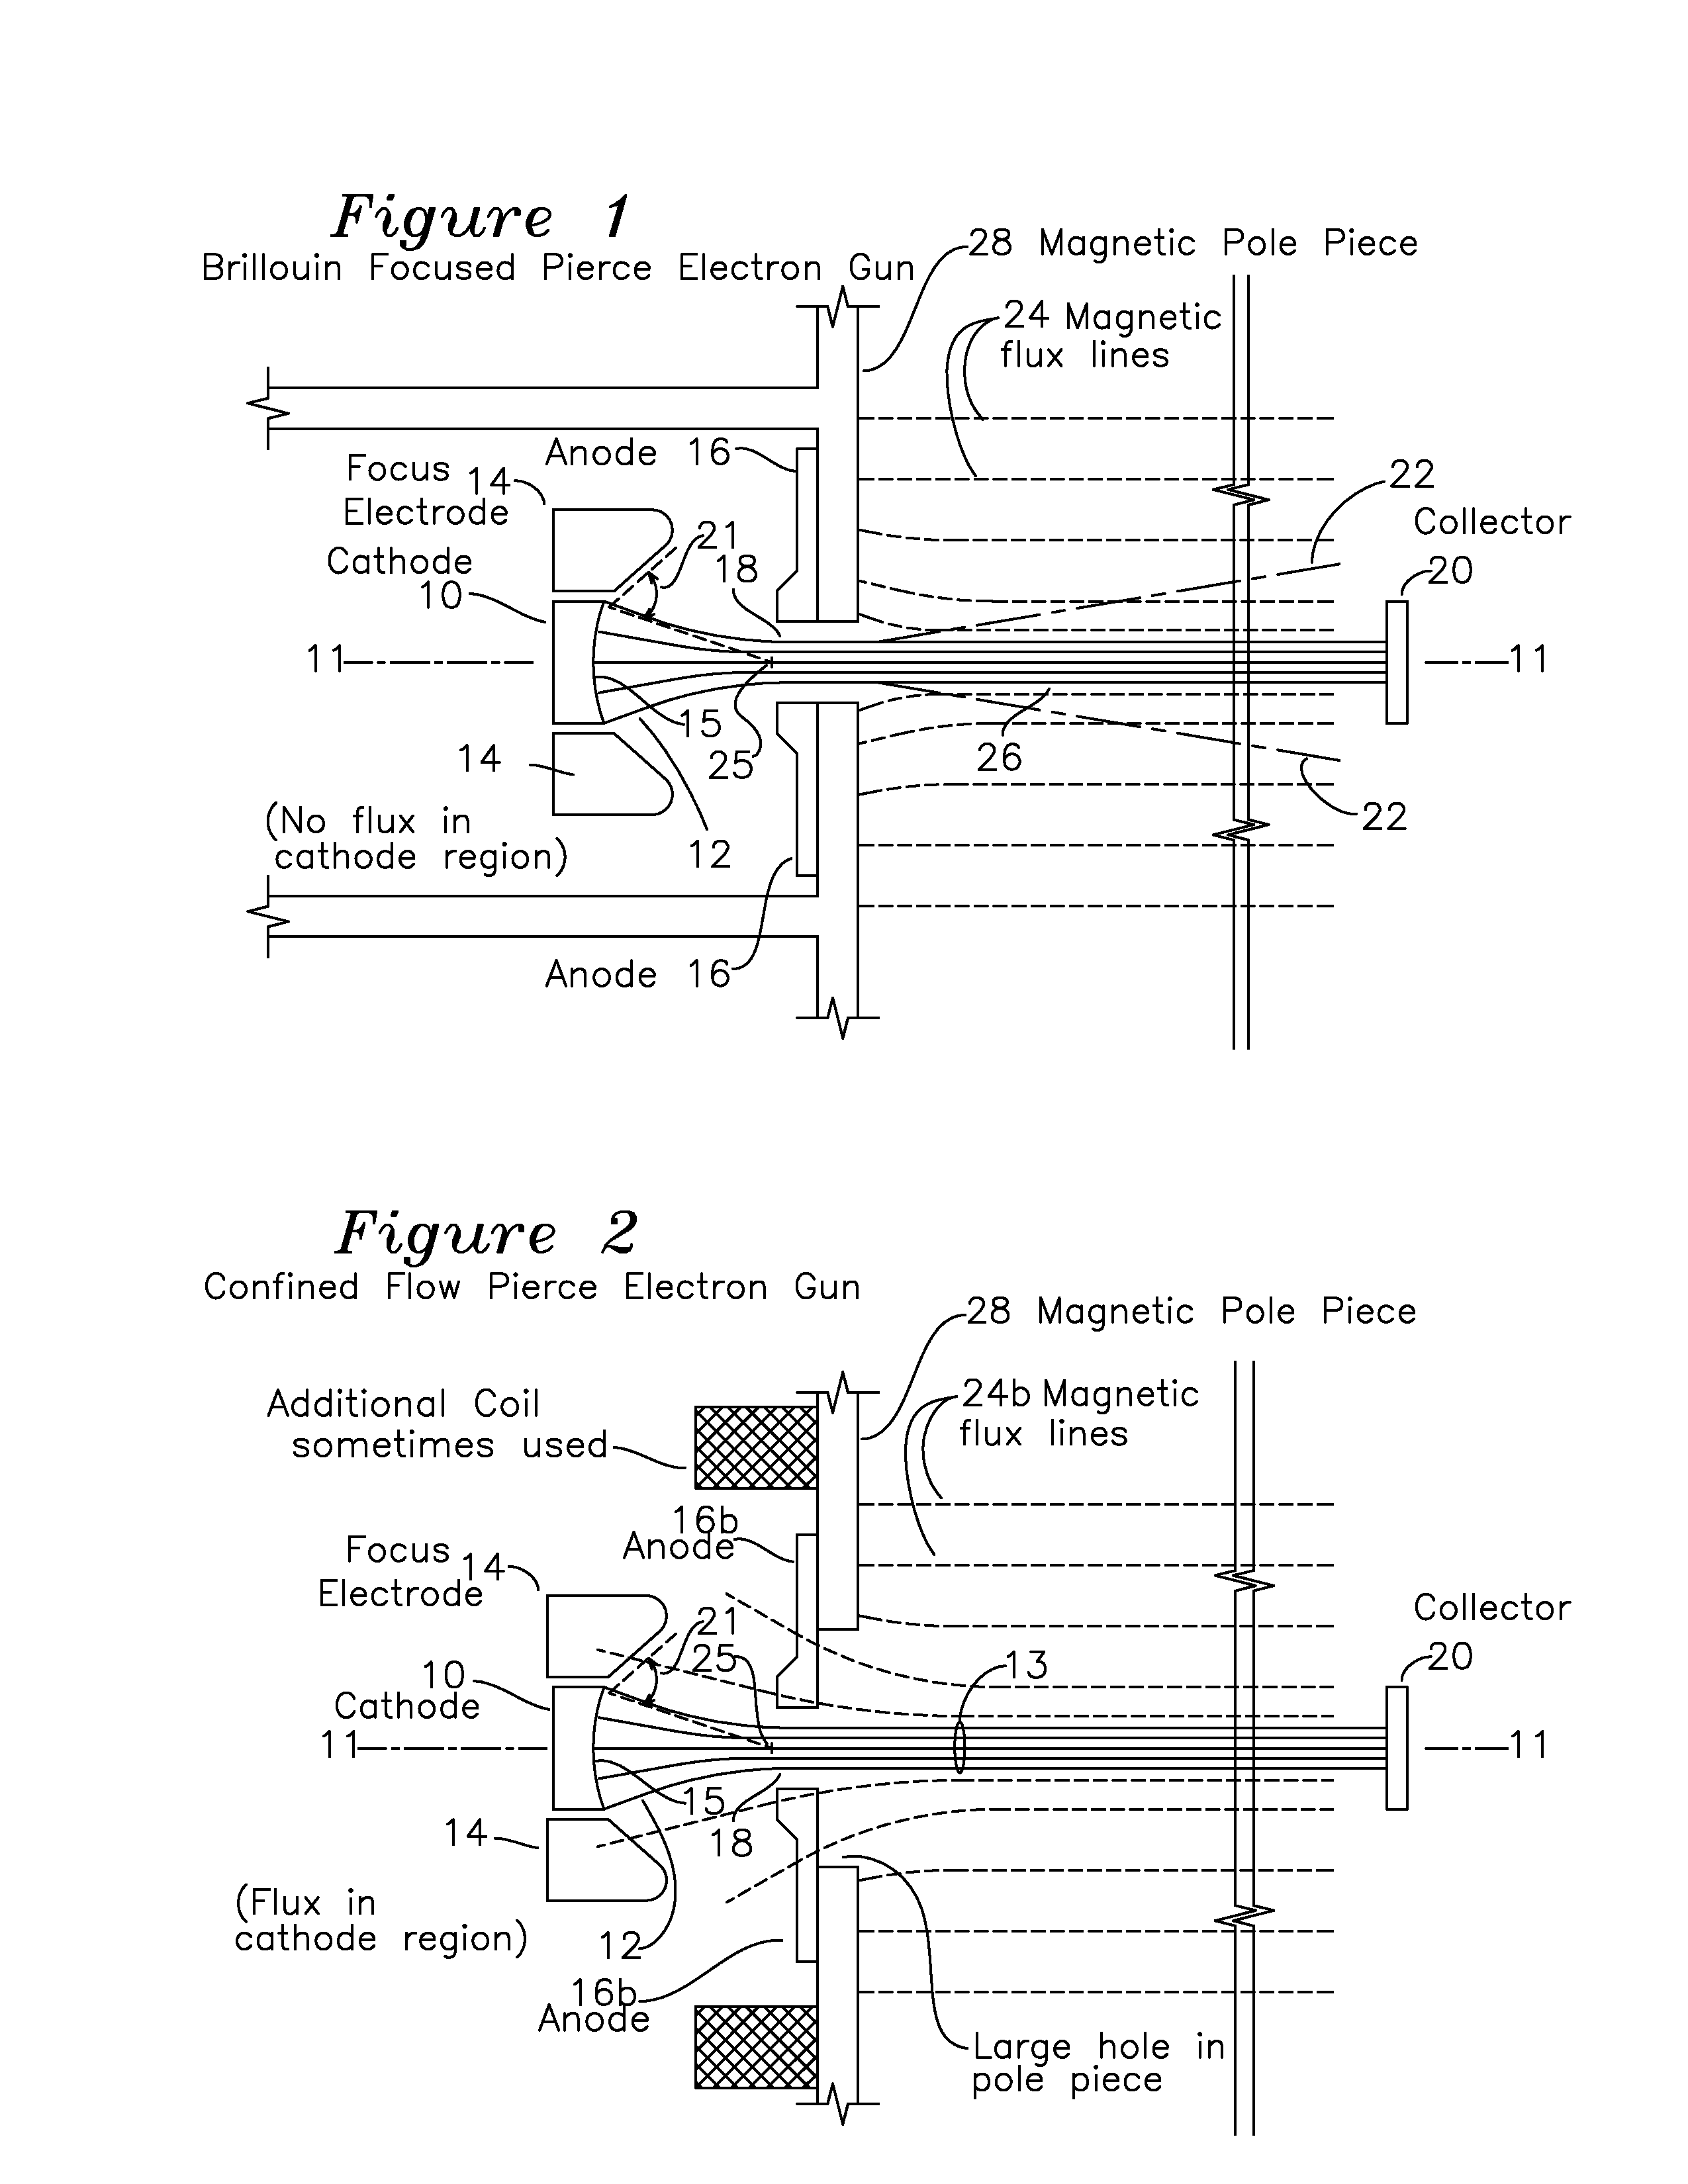 Electron gun for a multiple beam klystron with magnetic compression of the electron beams